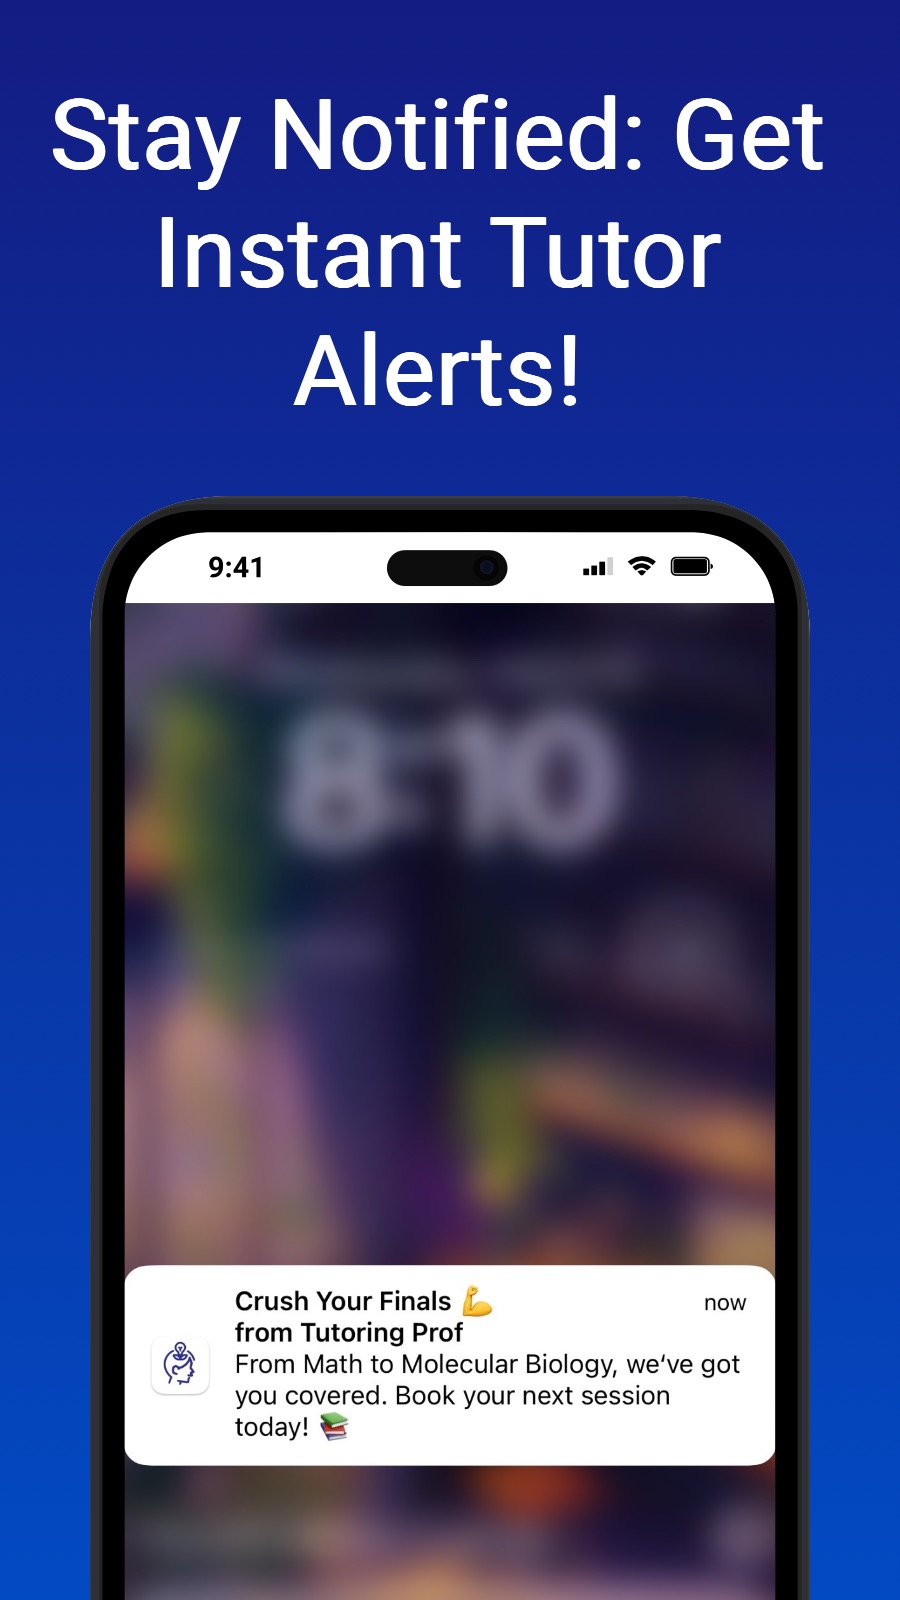 Stay Notified: Get Instant Tutor Alerts!